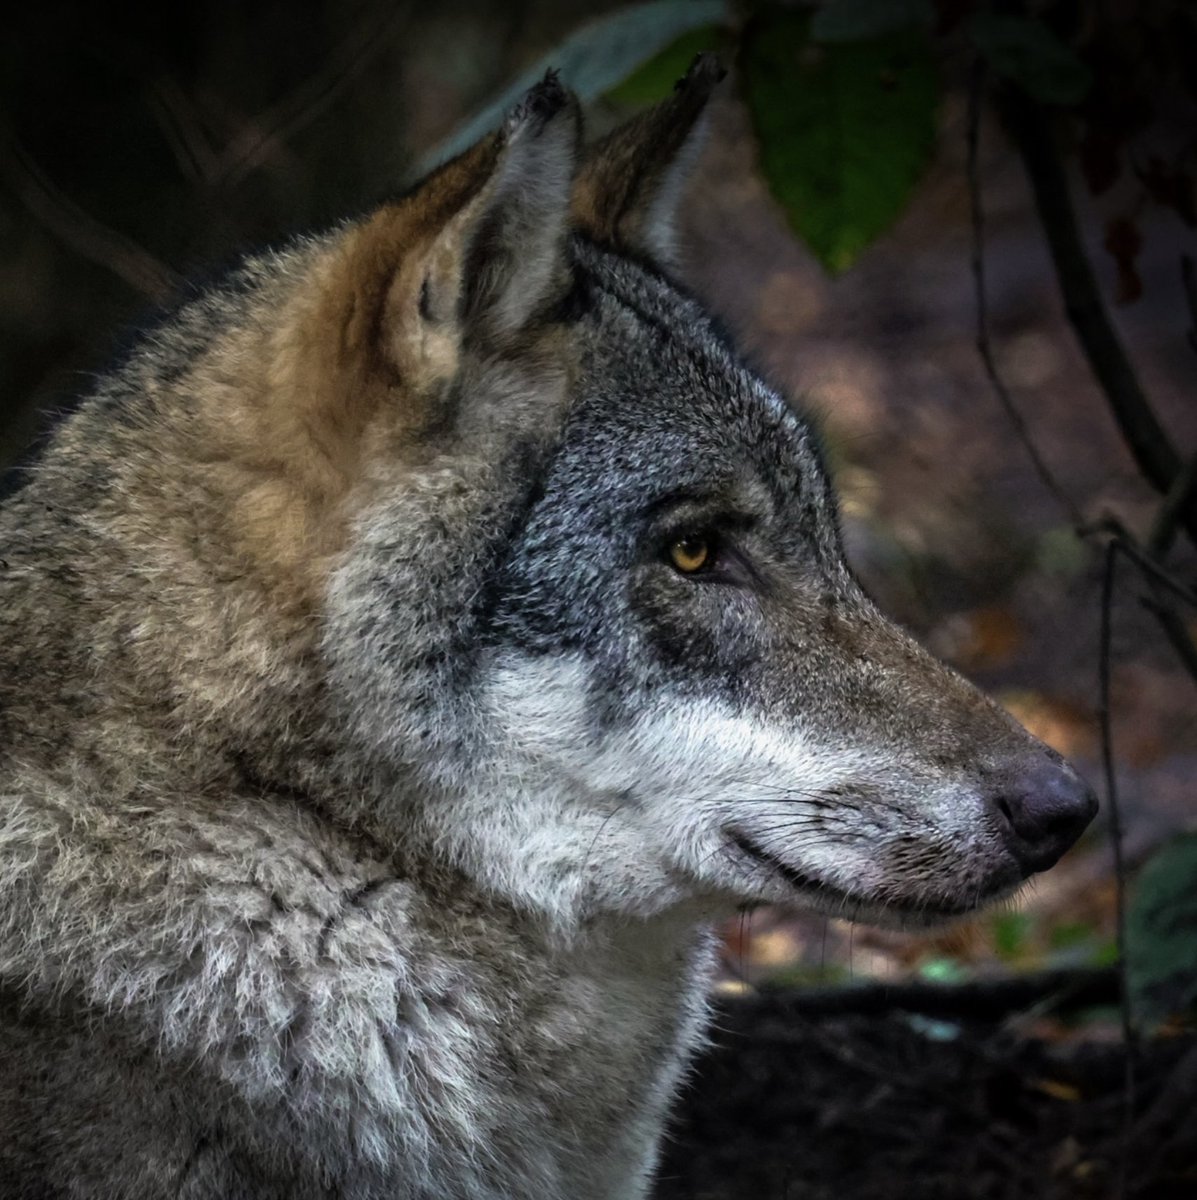 Only 5 spots free for our May Night Tour on May 29th🐺🌙✨ May 15th is already sold out, so fast finger first for the 29th! shop.wildwoodtrust.org/kent-tickets-a… Explore Wildwood at night and see our animals in a whole new light ✨ #wildwoodtrust #kent #nighttour